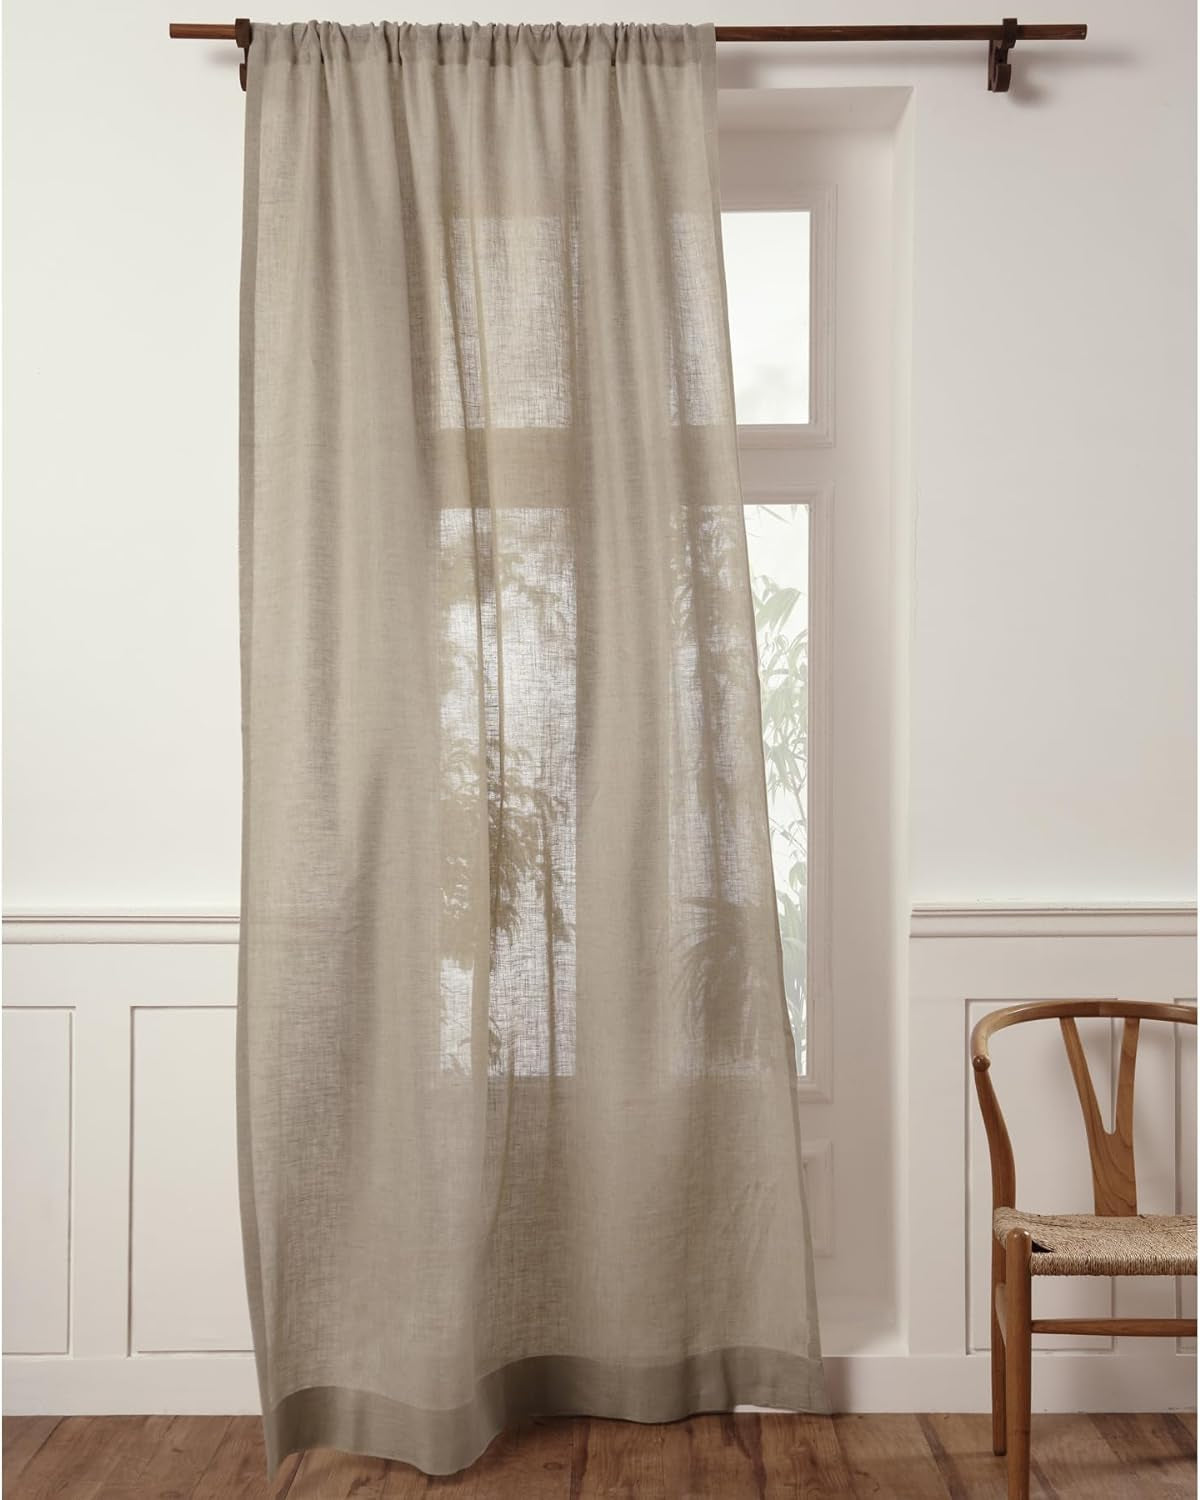 Solino Home Linen Sheer Curtain – 52 X 45 Inch Light Natural Rod Pocket Window Panel – 100% Pure Natural Fabric Curtain for Living Room, Indoor, Outdoor – Handcrafted from European Flax  Solino Home Natural 52 X 144 Inch 